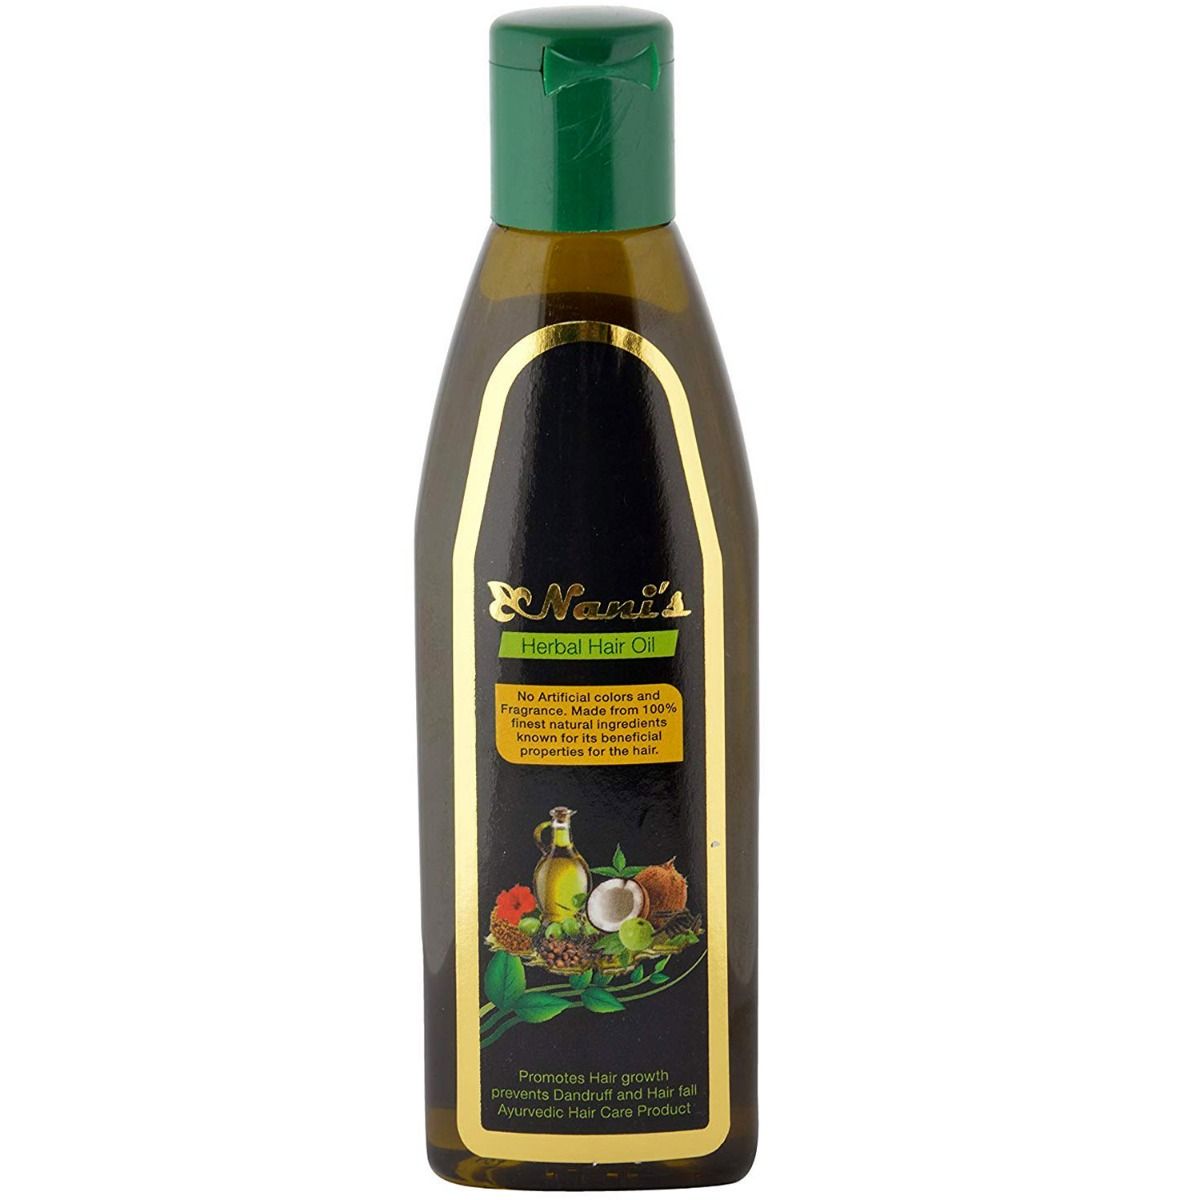 Nani's Herbal Hair Oil, 100 ml Price, Uses, Side Effects, Composition -  Apollo Pharmacy